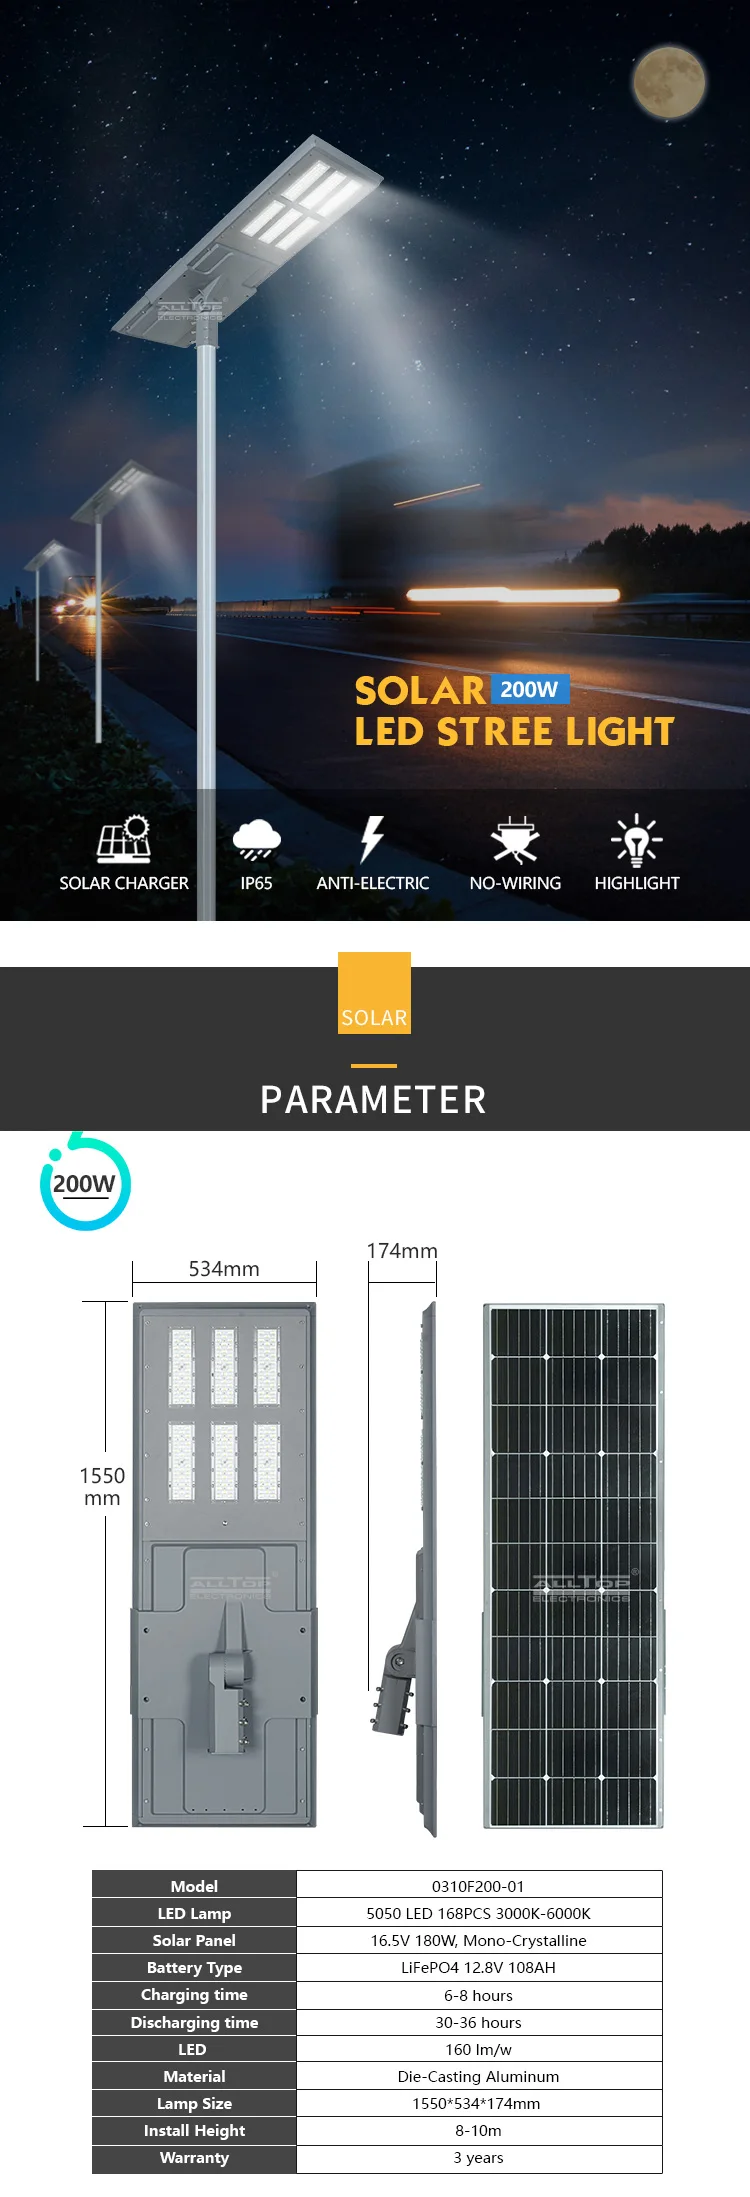 ALLTOP Outdoor waterproof lighting integrated all in one 200w solar led street light